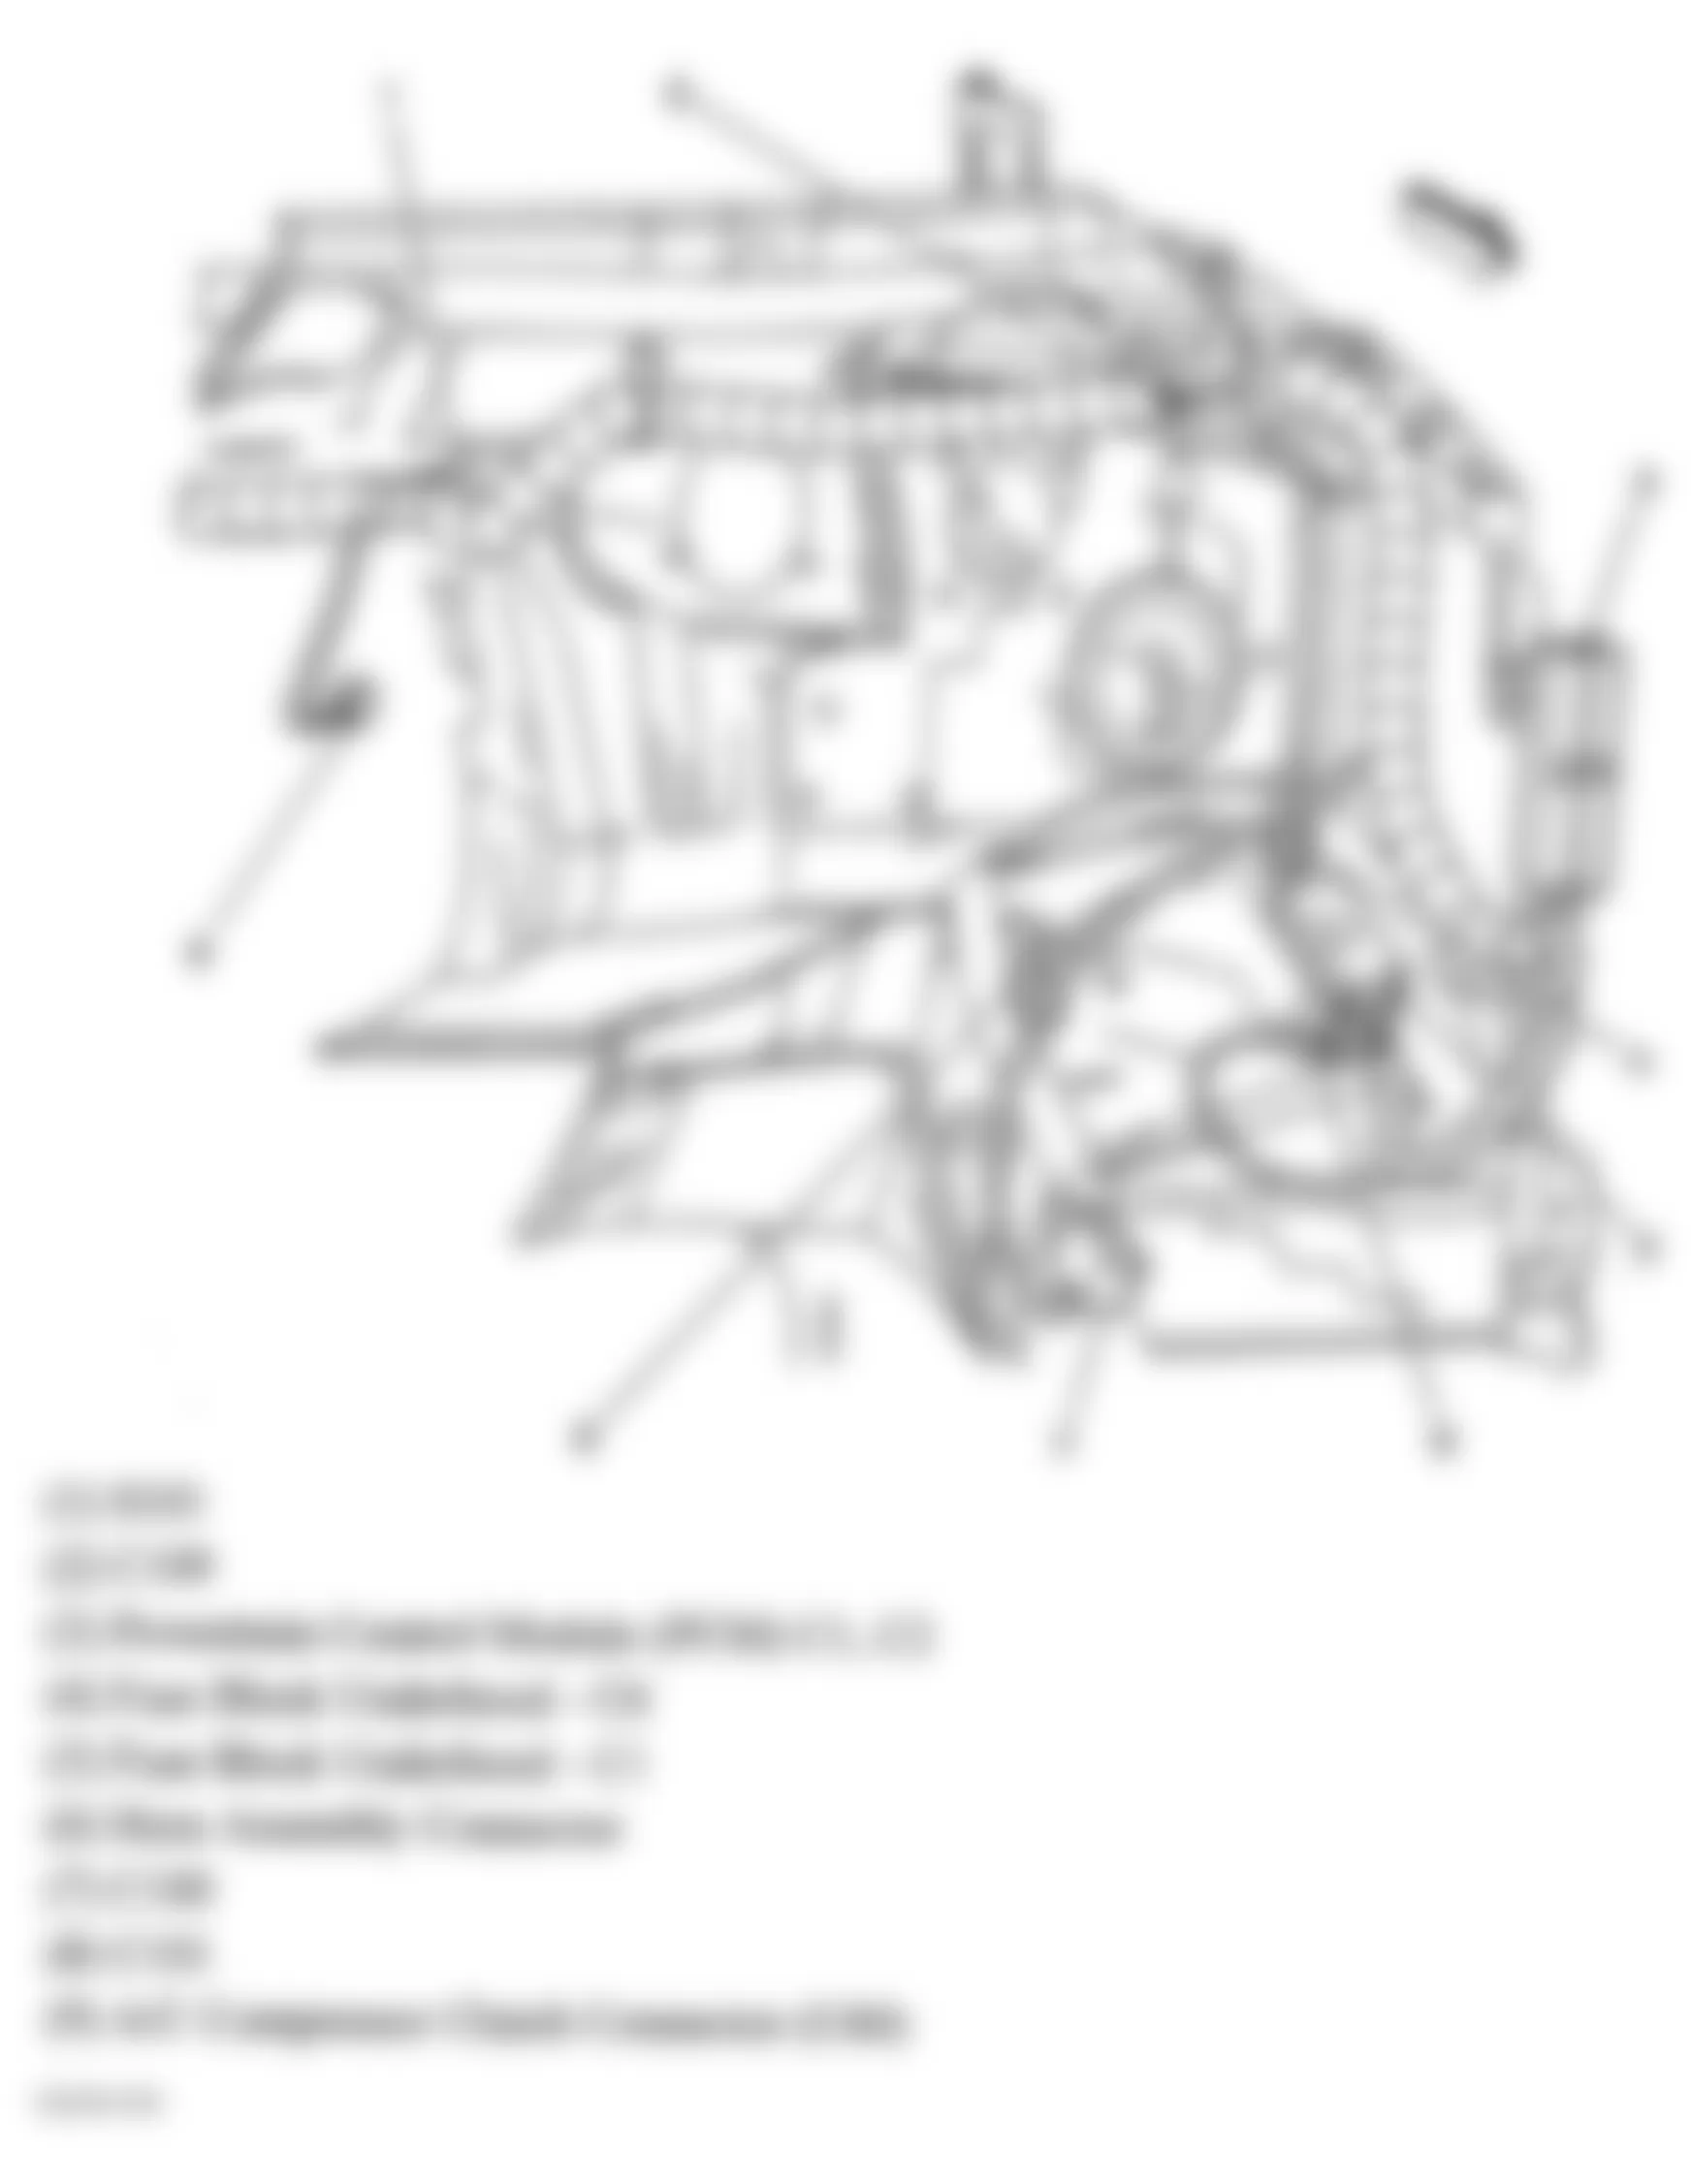 GMC Savana H1500 2005 - Component Locations -  Left Rear Of Engine Compartment